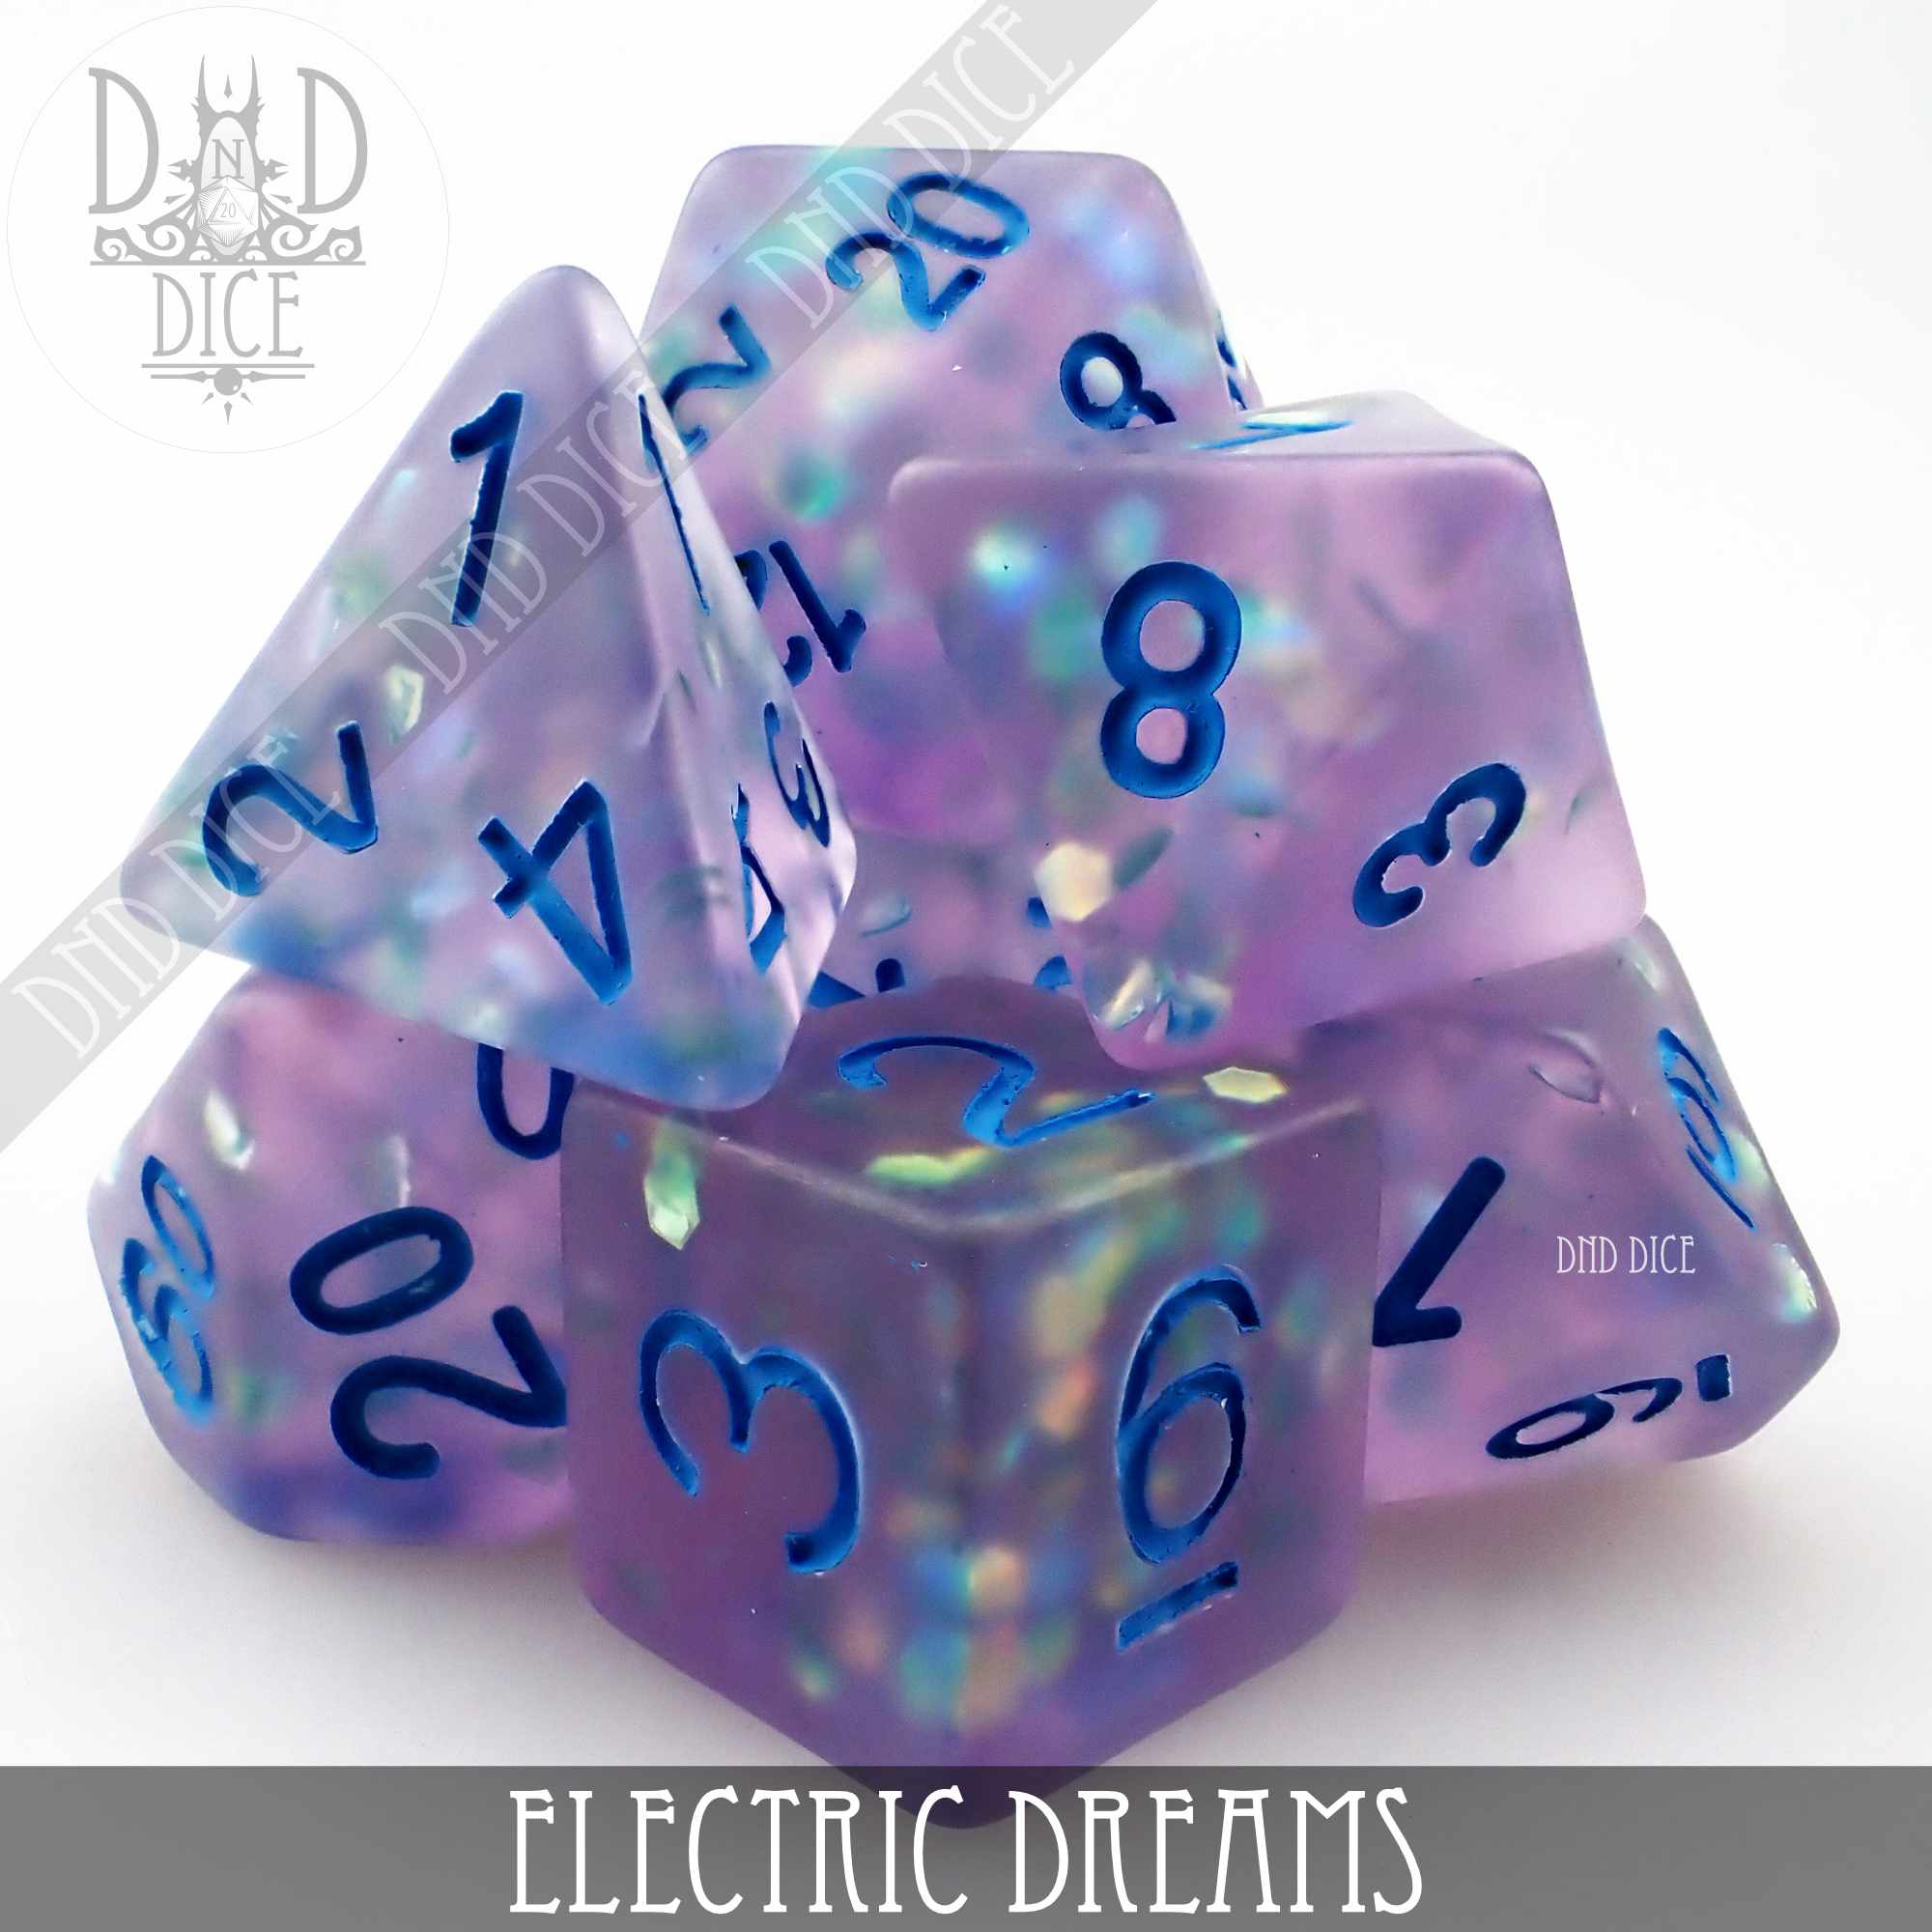 Electric Dreams Frosted Dice Set